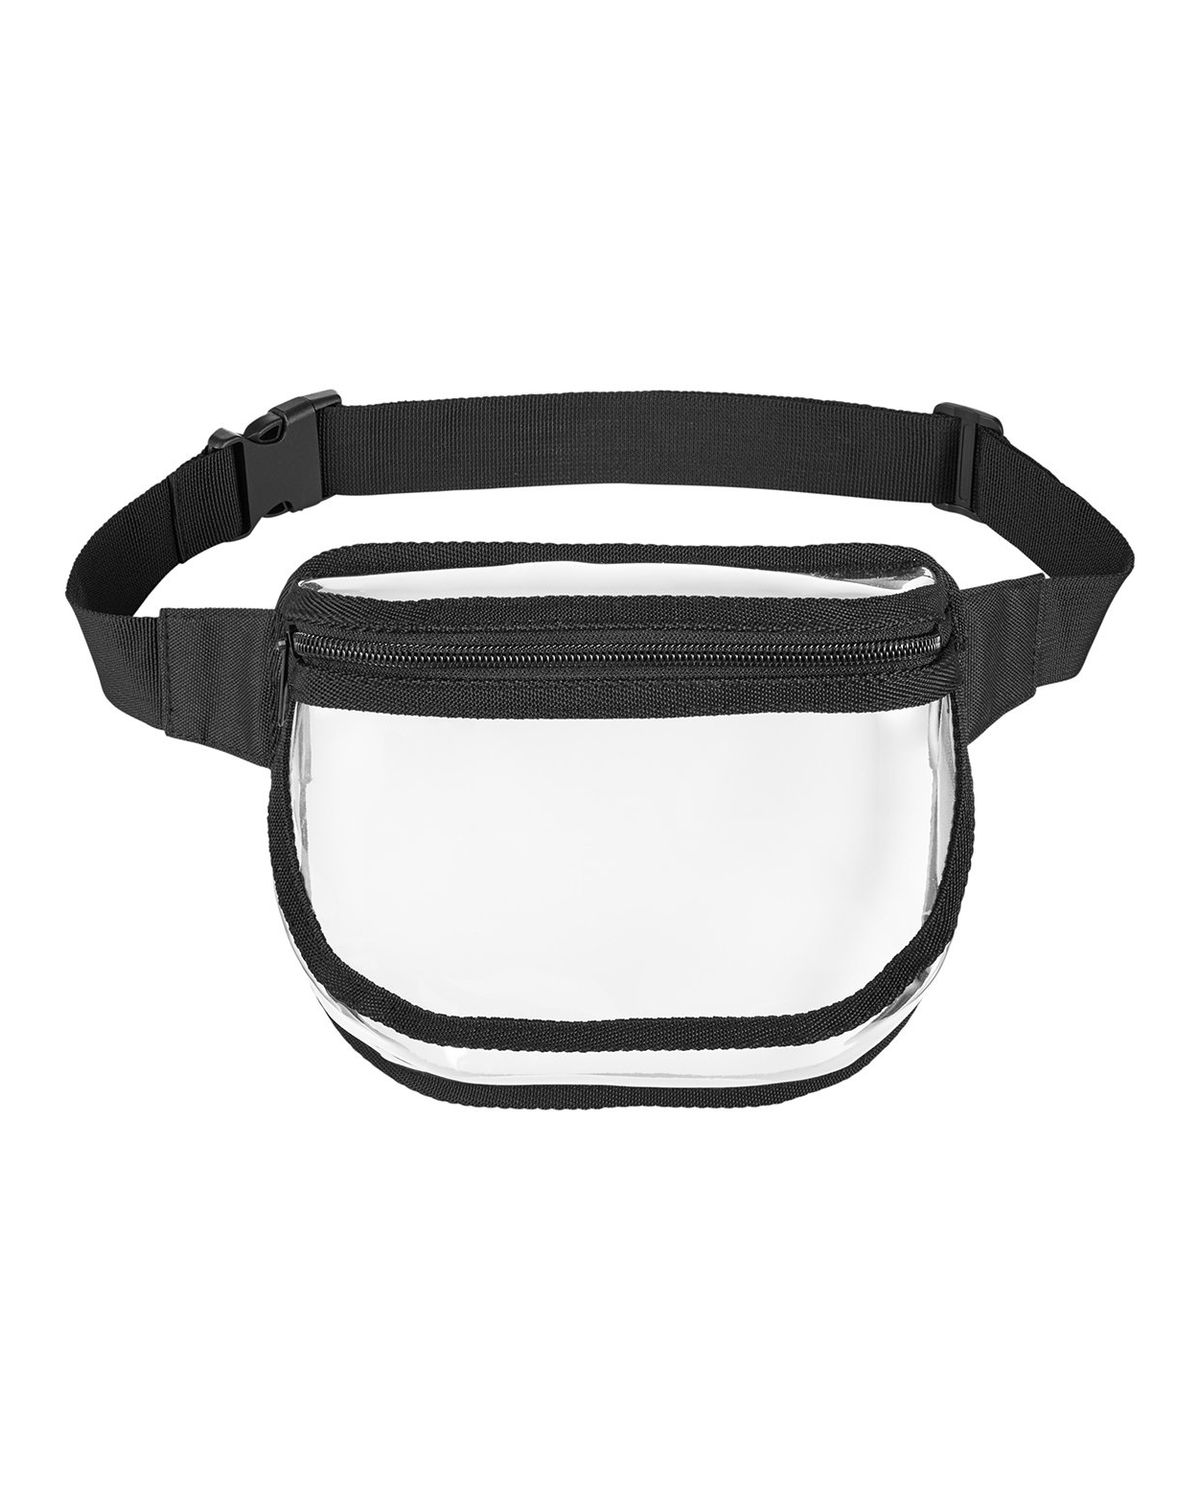 'BAGedge BE264 Unisex Clear PVC Fanny Pack'